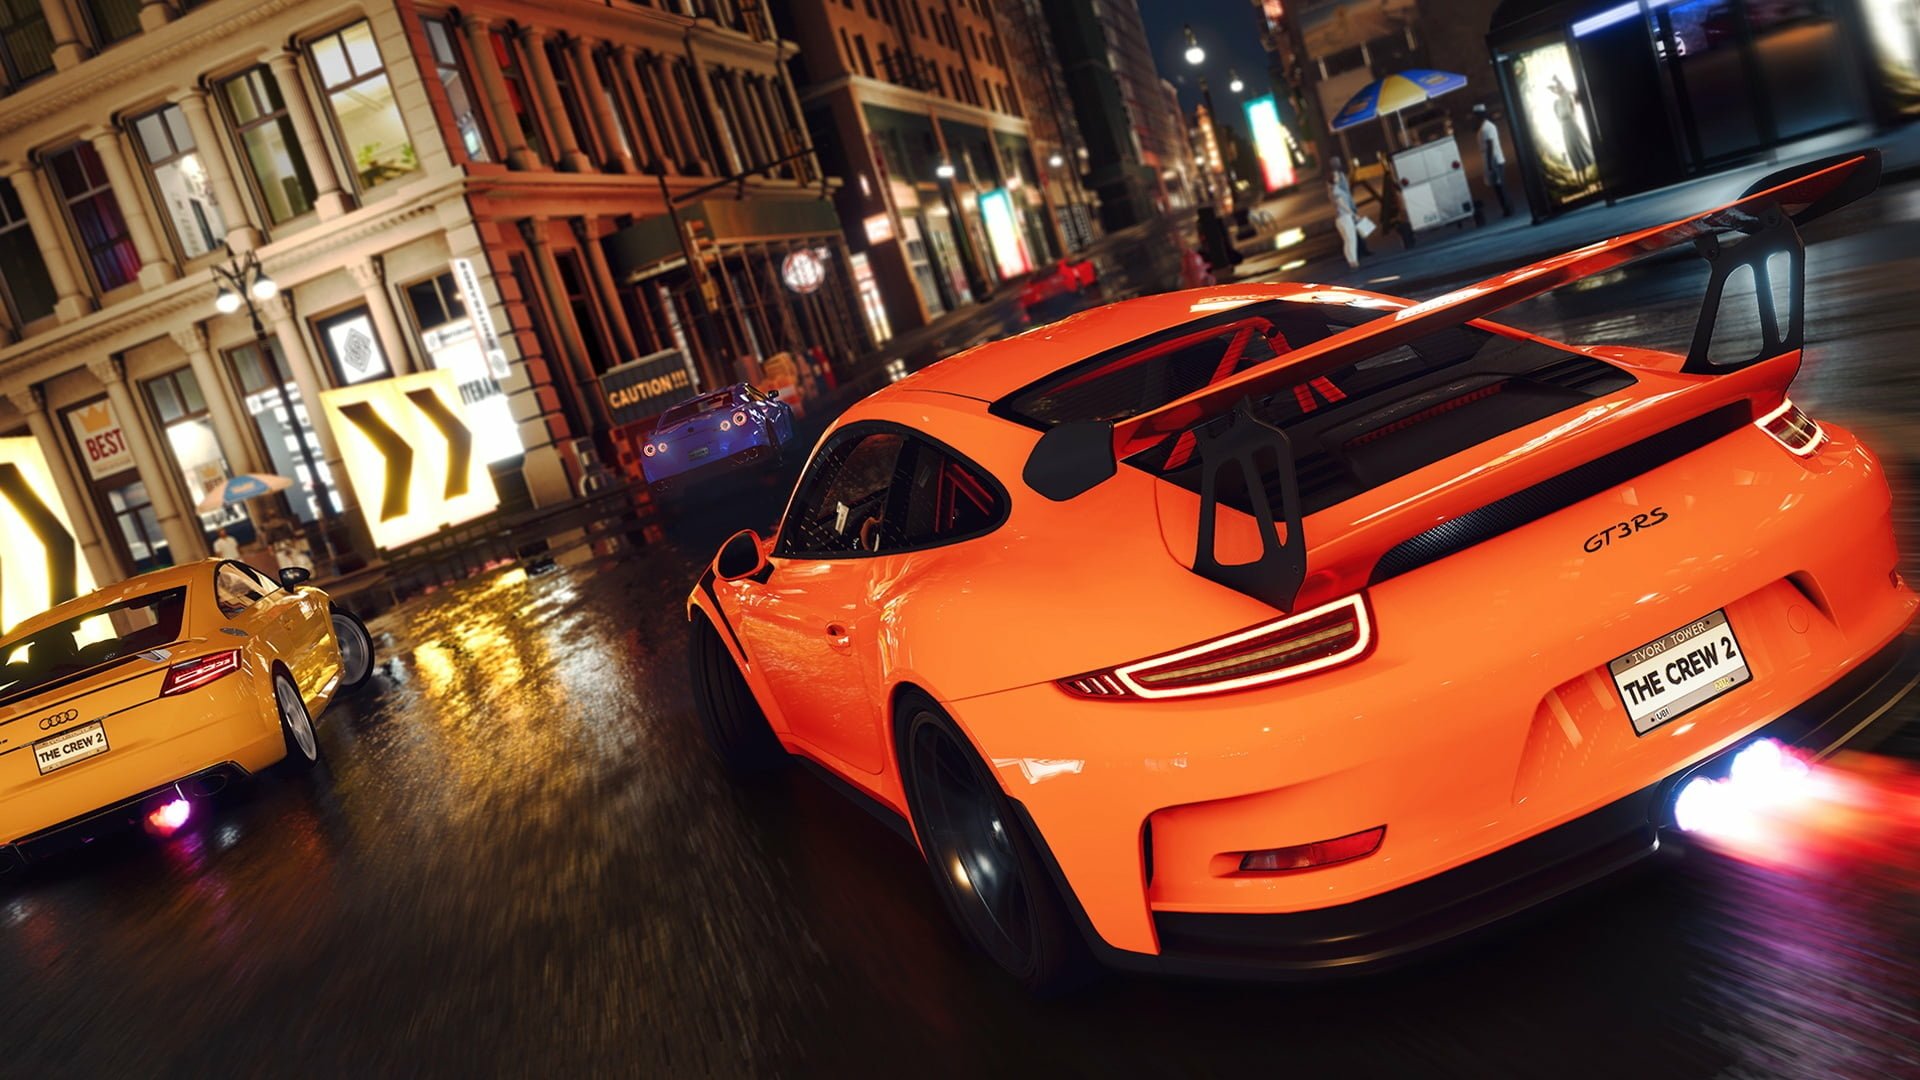 The crew 2 wallpaper by TimelessGamer - Download on ZEDGE™